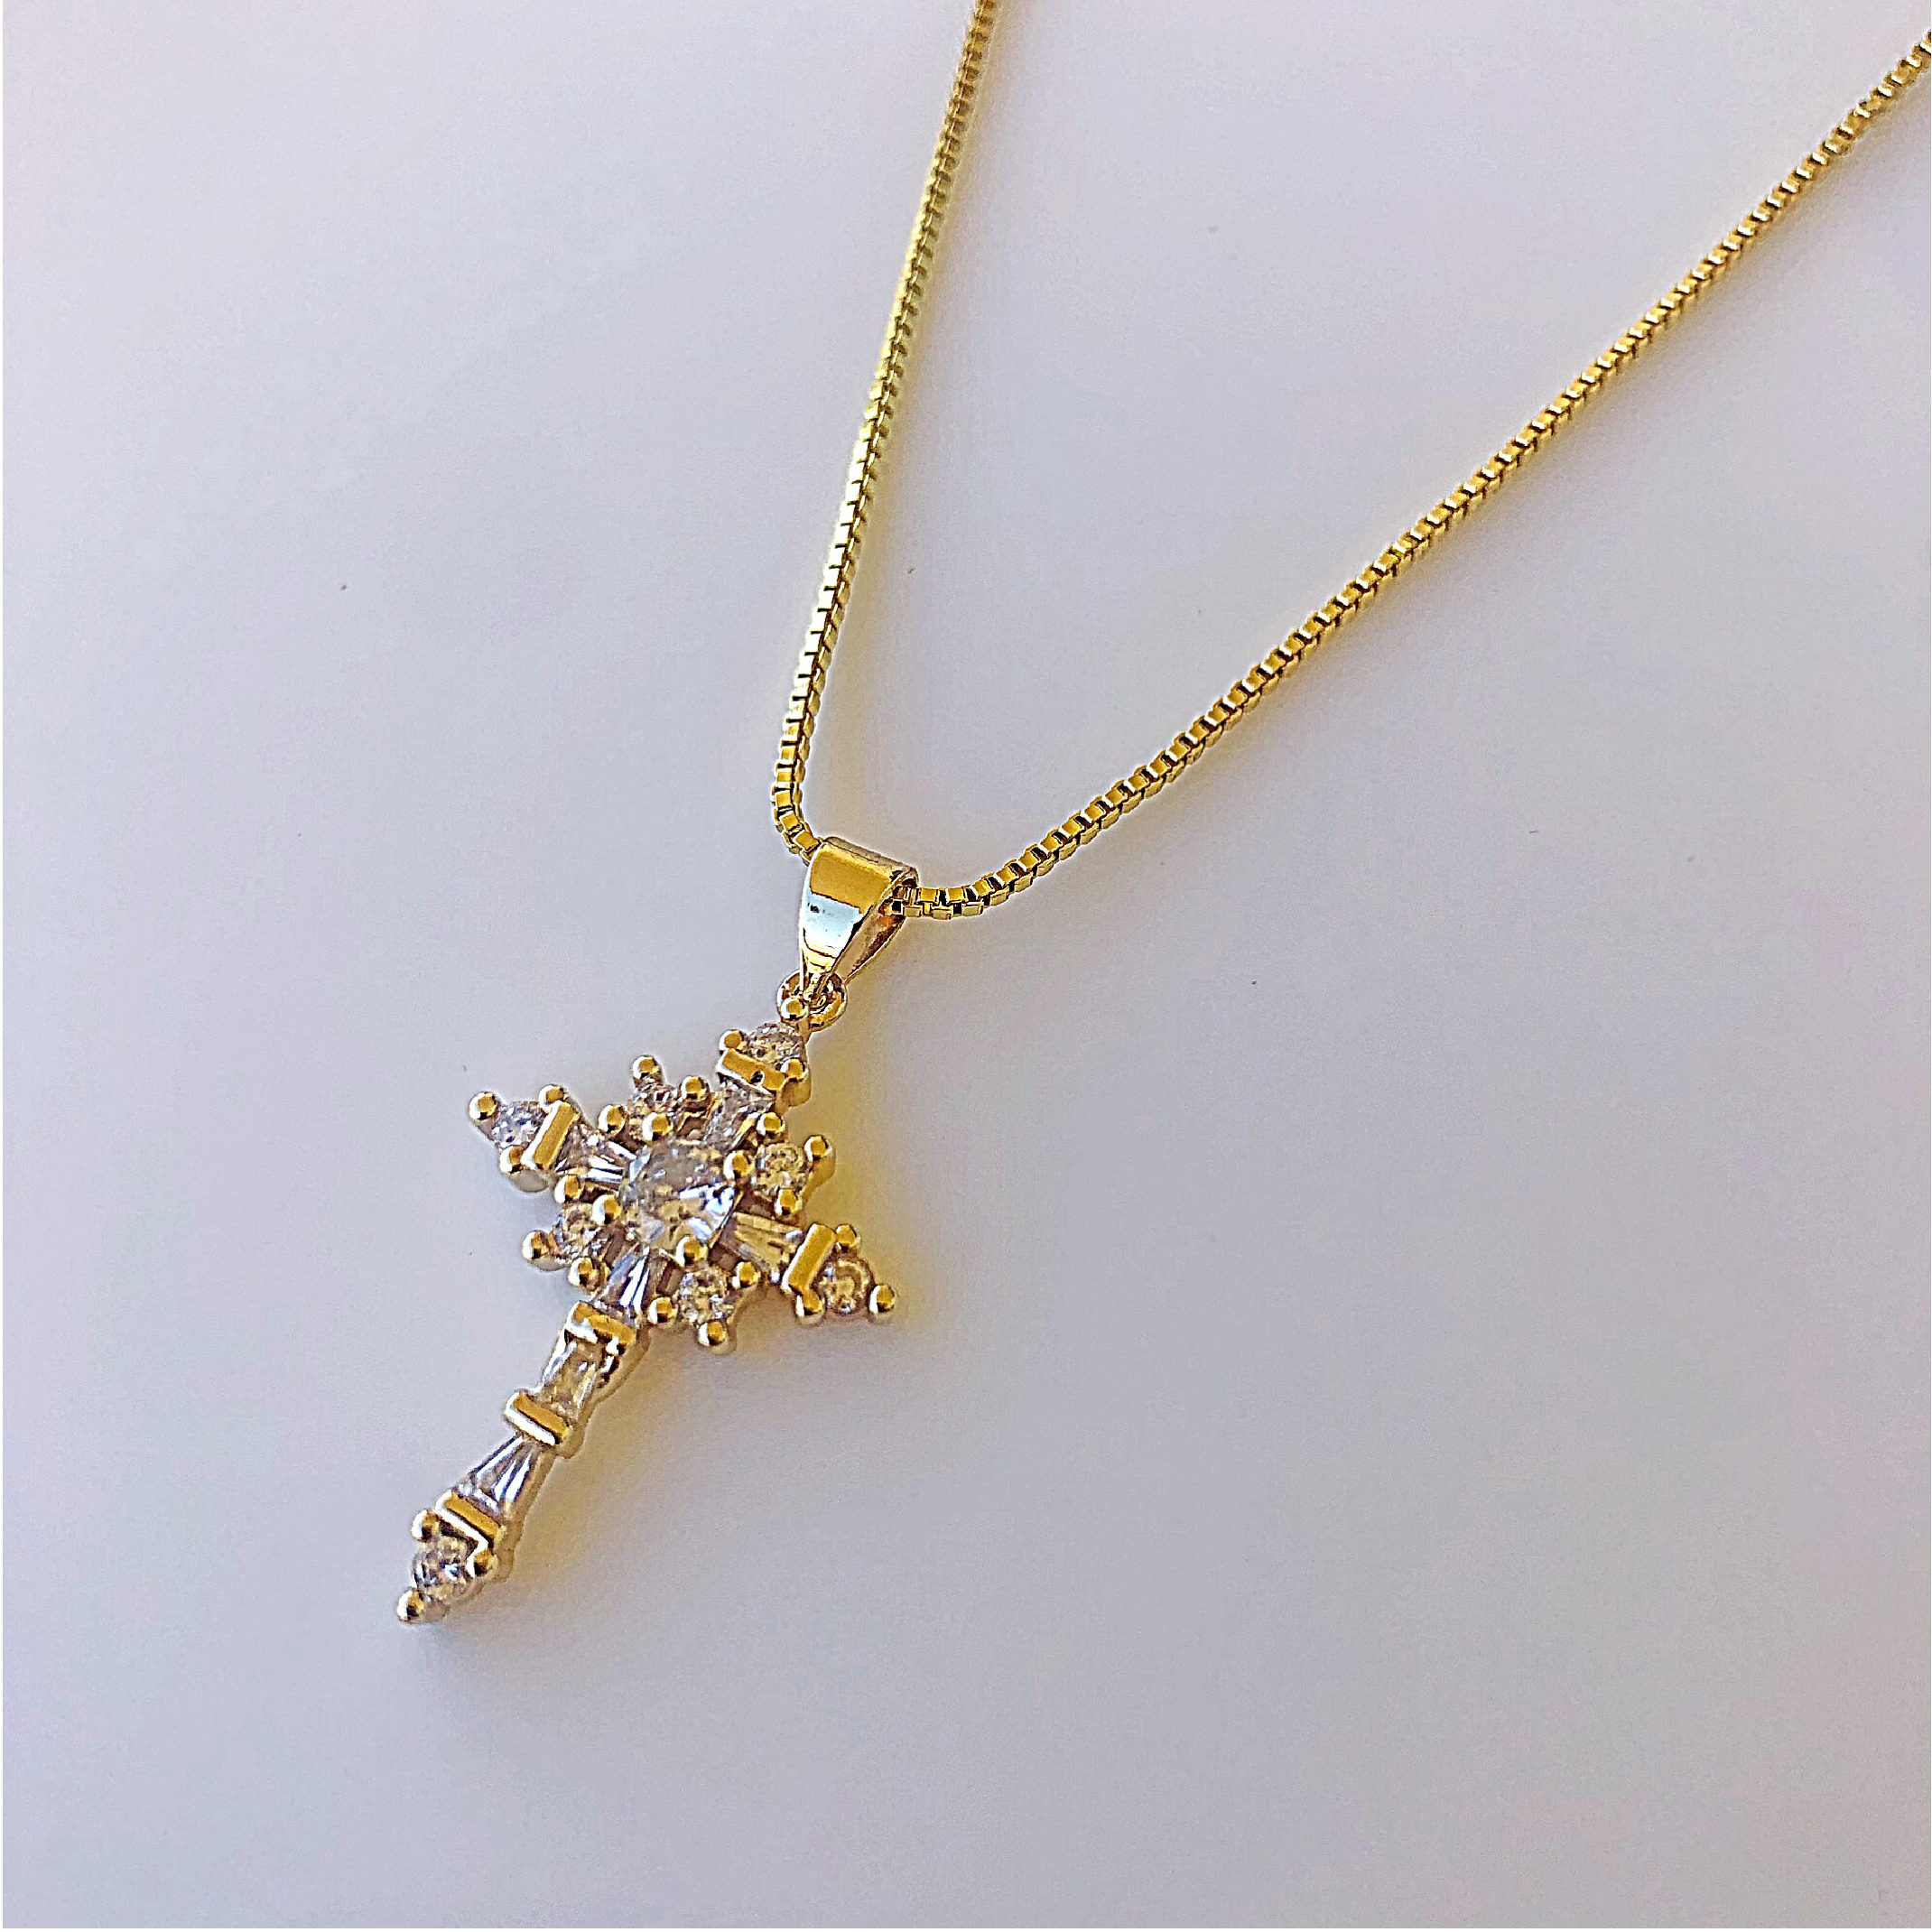 Real gold cross necklace 